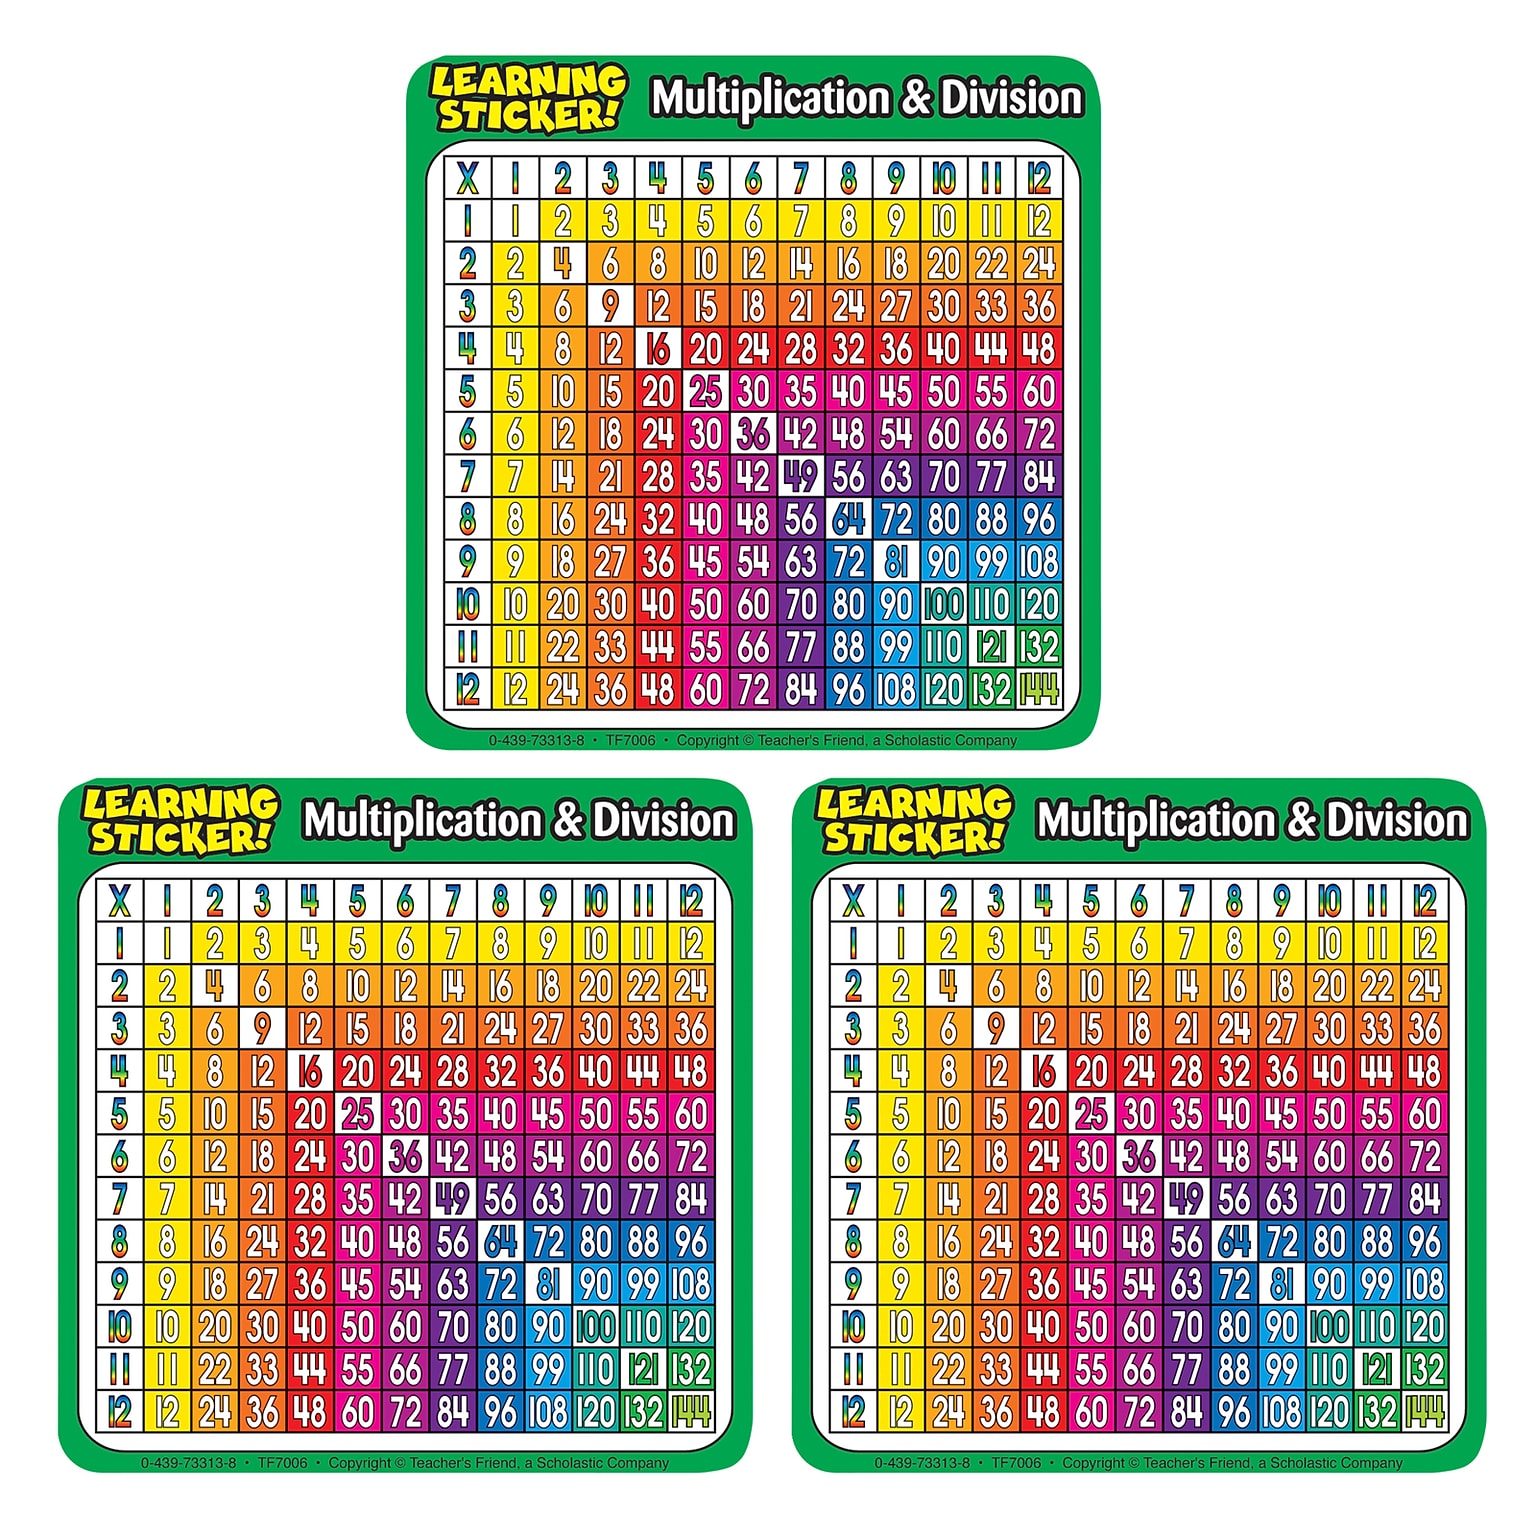 Scholastic Teaching Solutions Multiplication-Division Learning Stickers, 4, 20 Per Pack, 3 Packs (TF-7006-3)